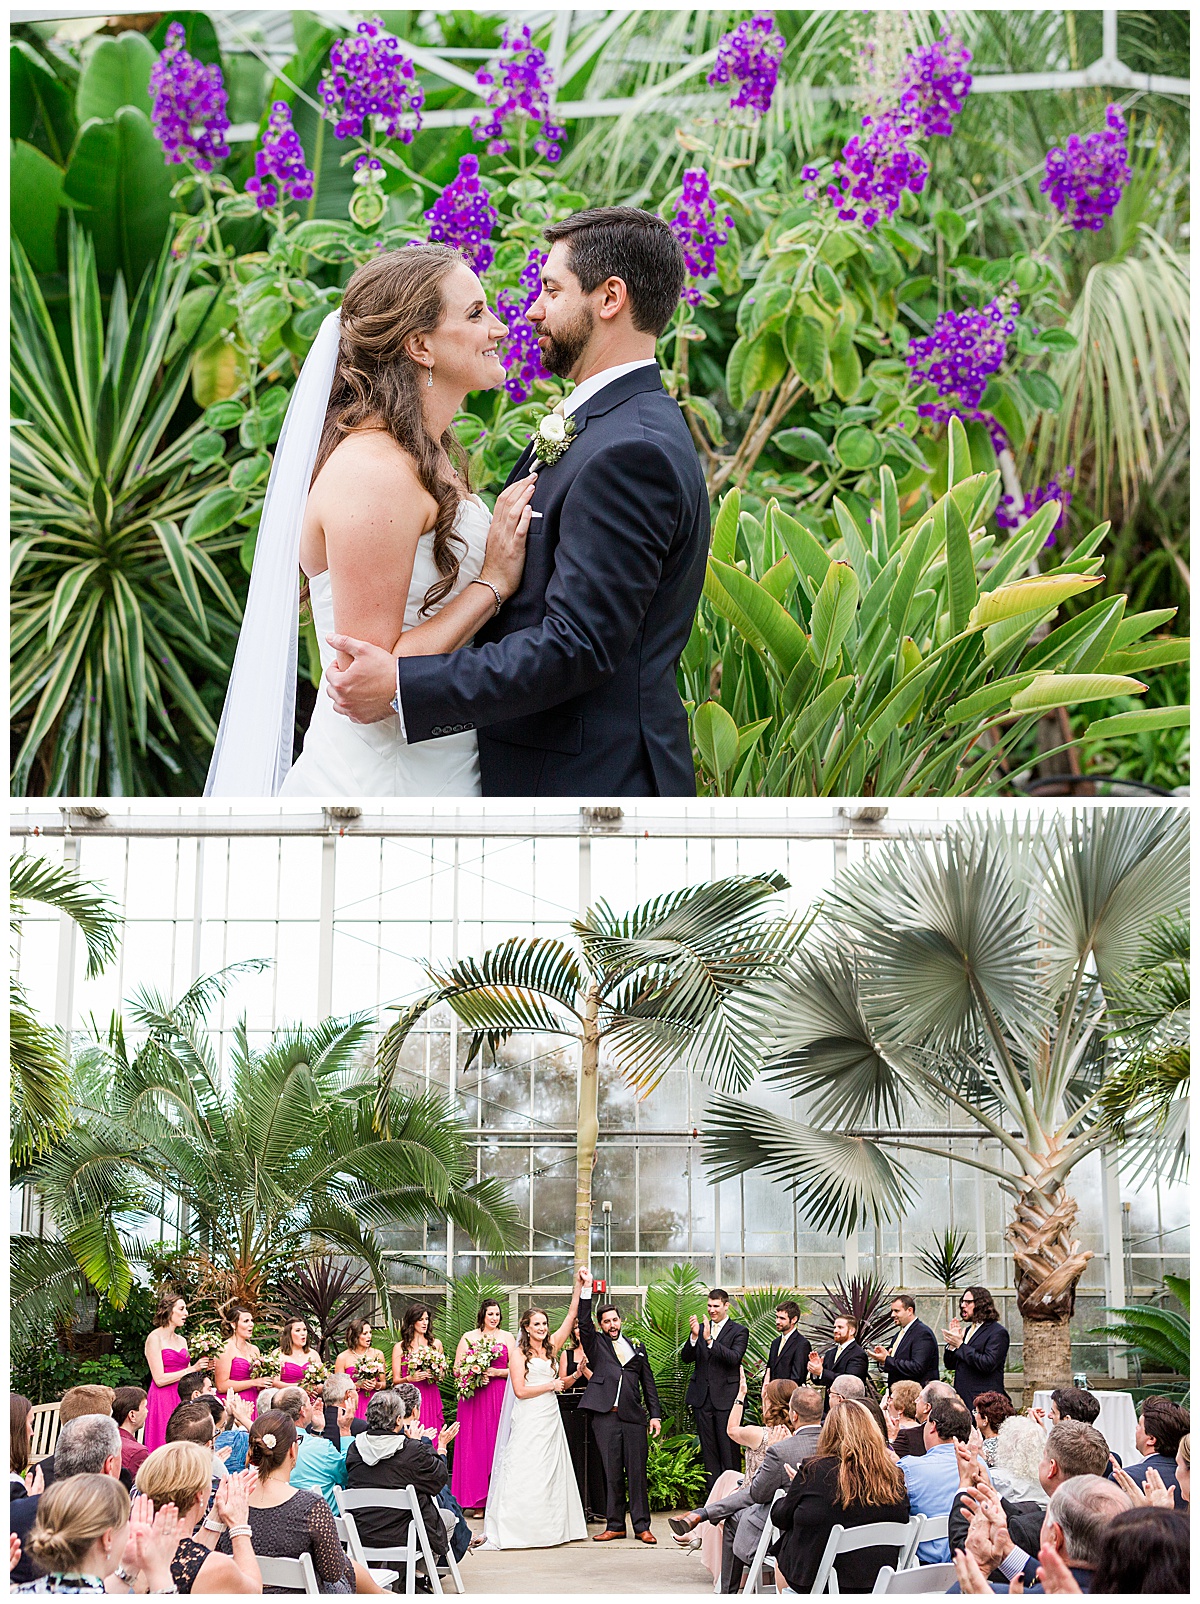 A bride and groom share a moment inside the lush gardens in the Roger Williams Botanical Center